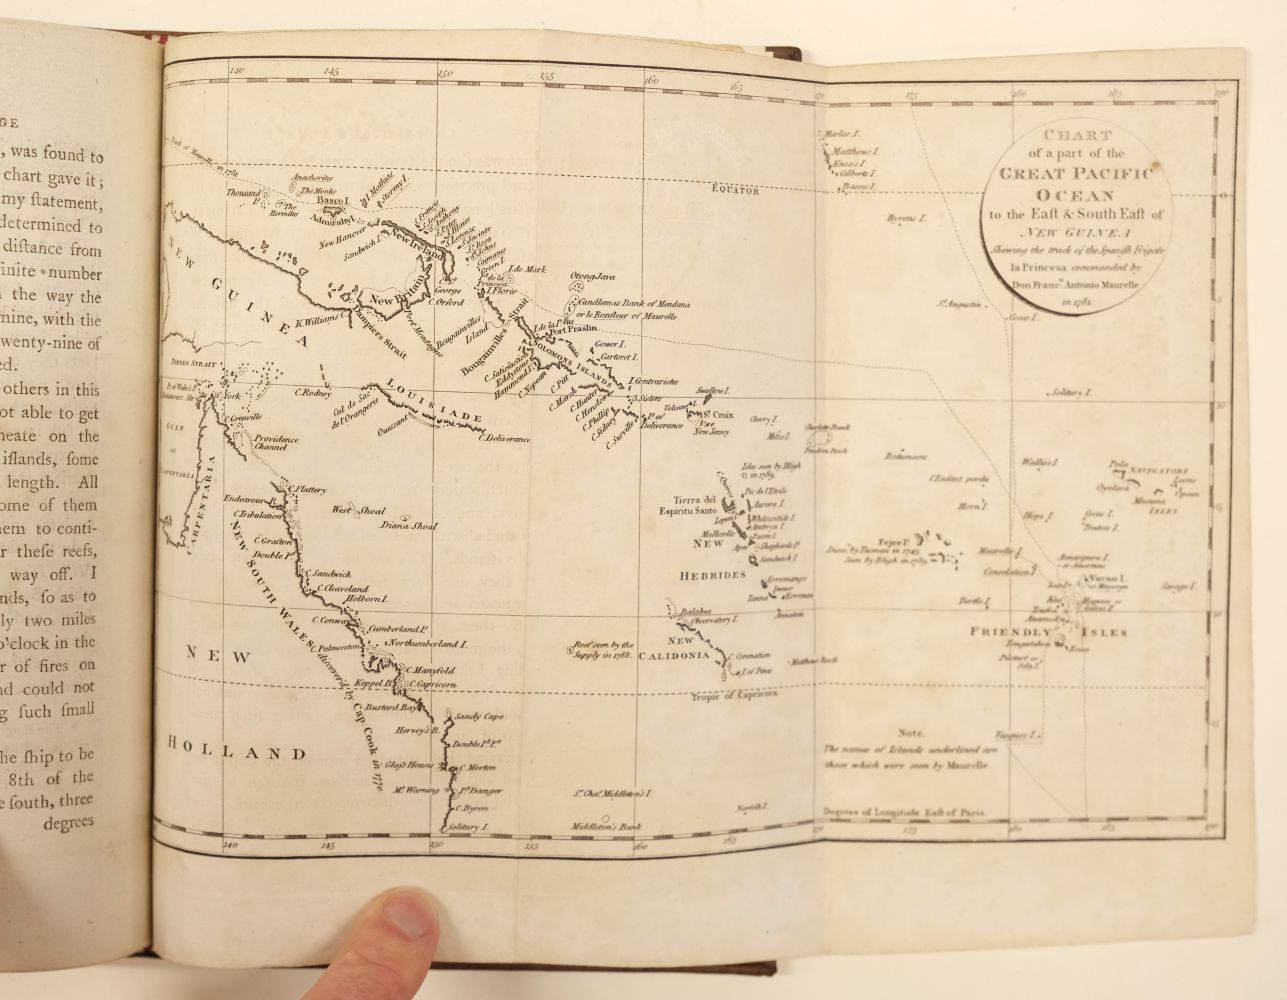 La Perouse (Jean-Francois). The Voyage of La Perouse Round the World, 3 volumes, 1798 - Image 5 of 18